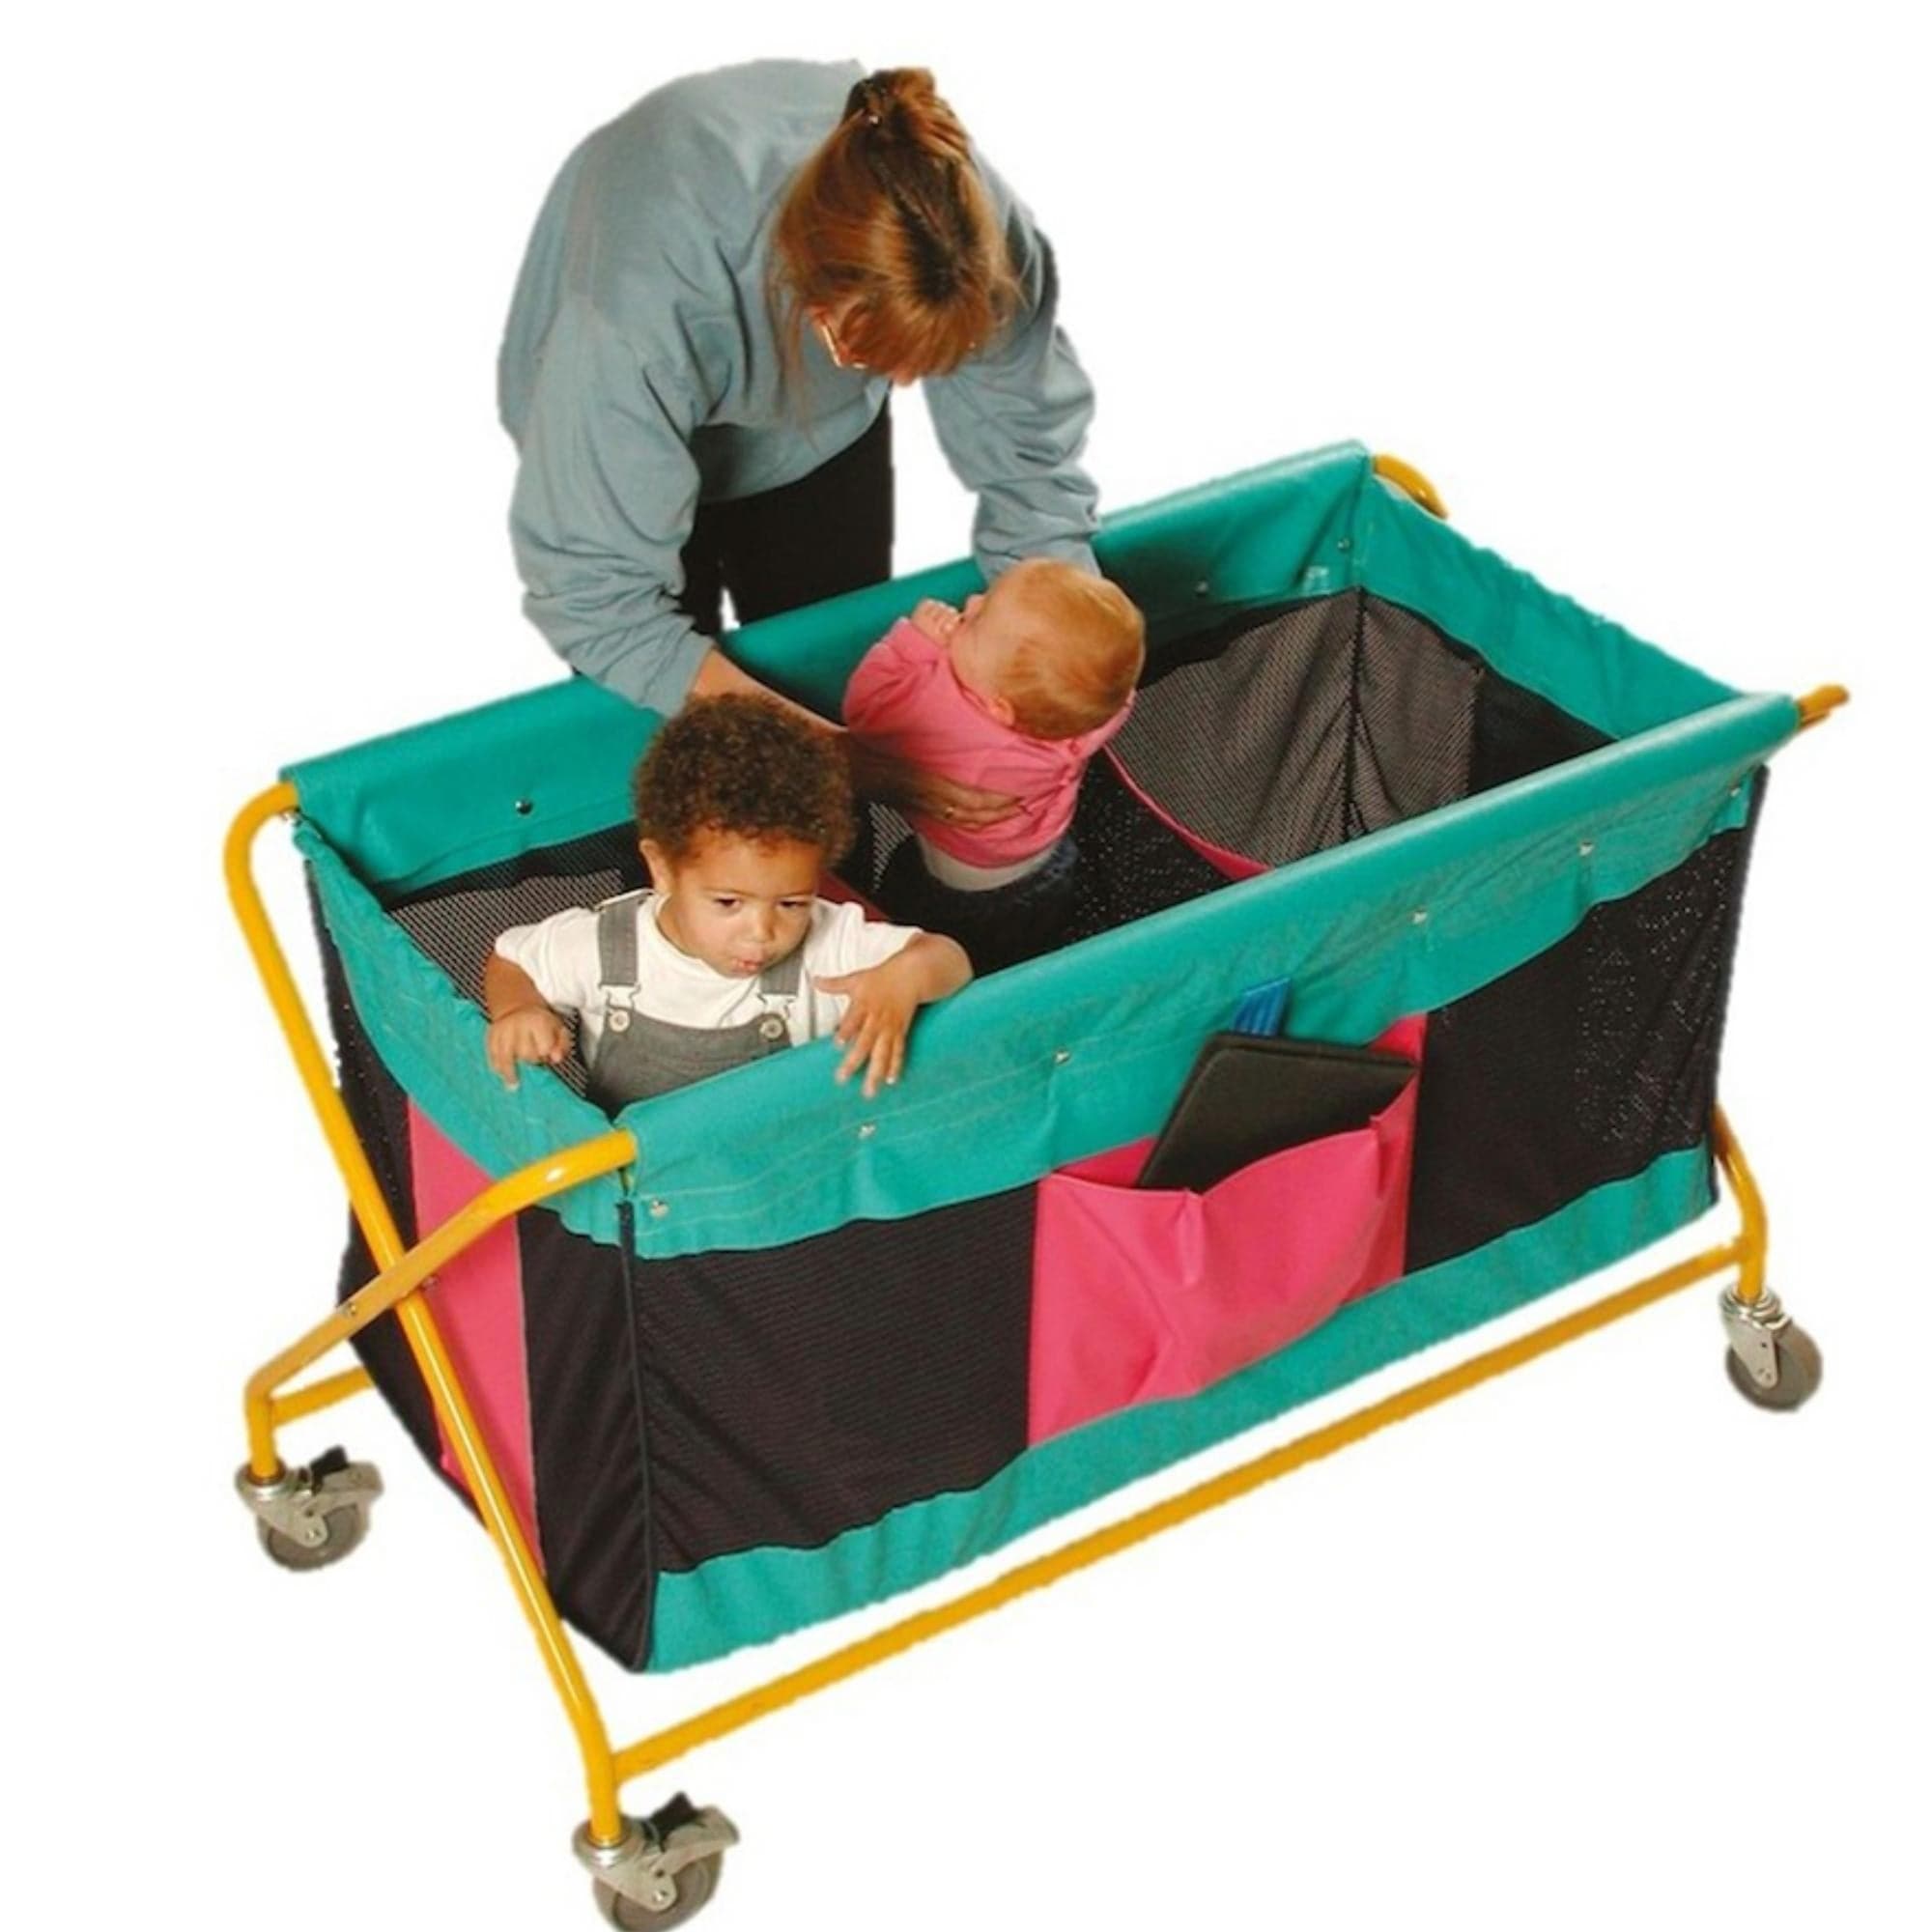 Nursery Evacuation Trolley, This fantastic Nursery Evacuation Trolley is ideal for emergencies. Use the Nursery Evacuation Trolley for transporting a number of small children within a building.The Nursery Evacuation Trolley features heavy duty castors and fabric sides, the strong frame folds flat, making it very easy to store. The fabric can be wiped clean using a damp cloth with mild detergent. The Nursery Evacuation Trolley has three compartments so older children can be separated from young babies. Devel